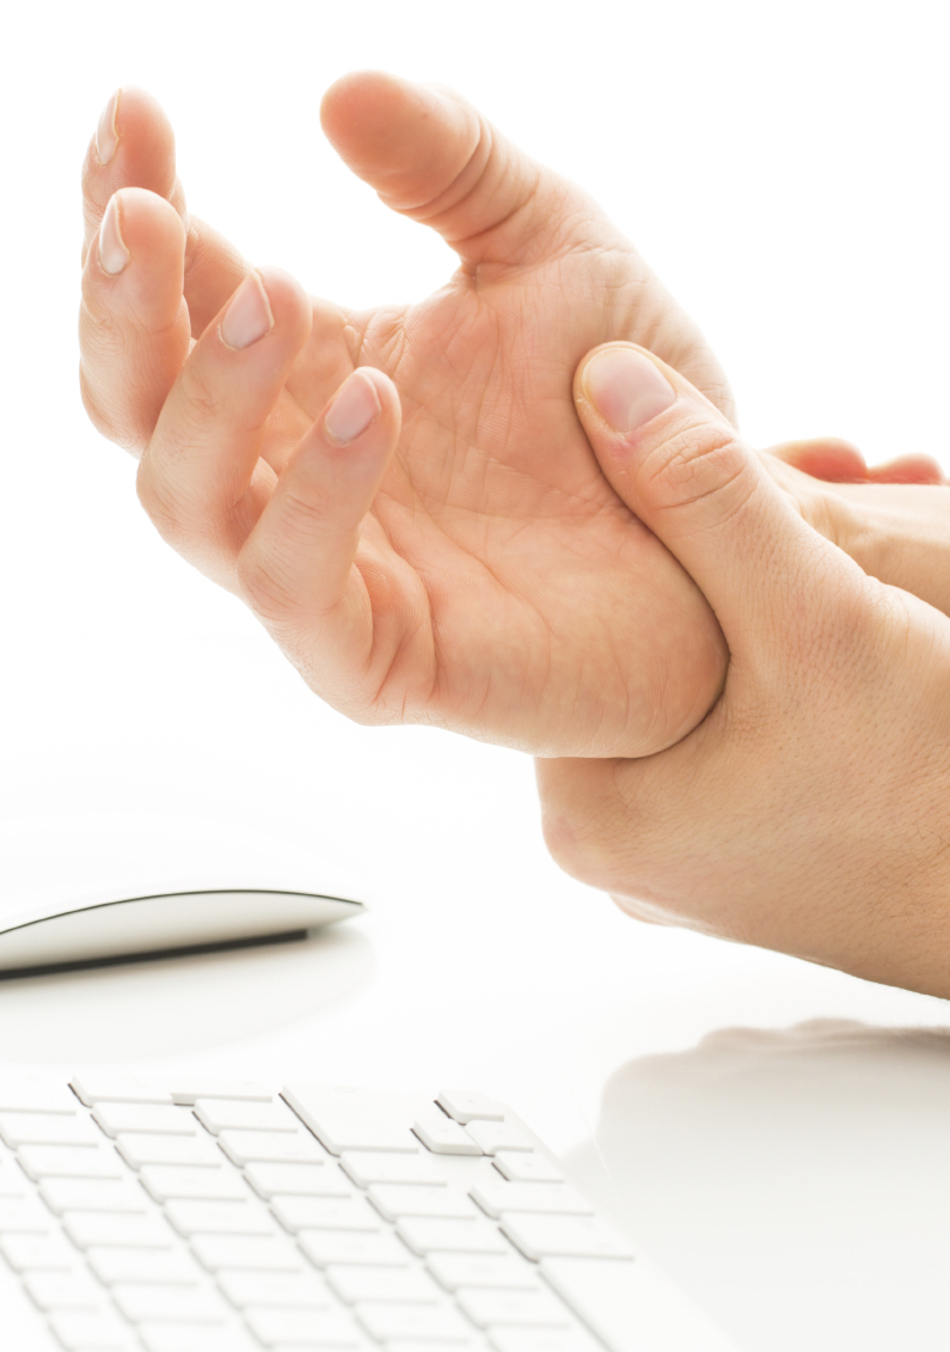 Do I Have Carpal Tunnel Syndrome?